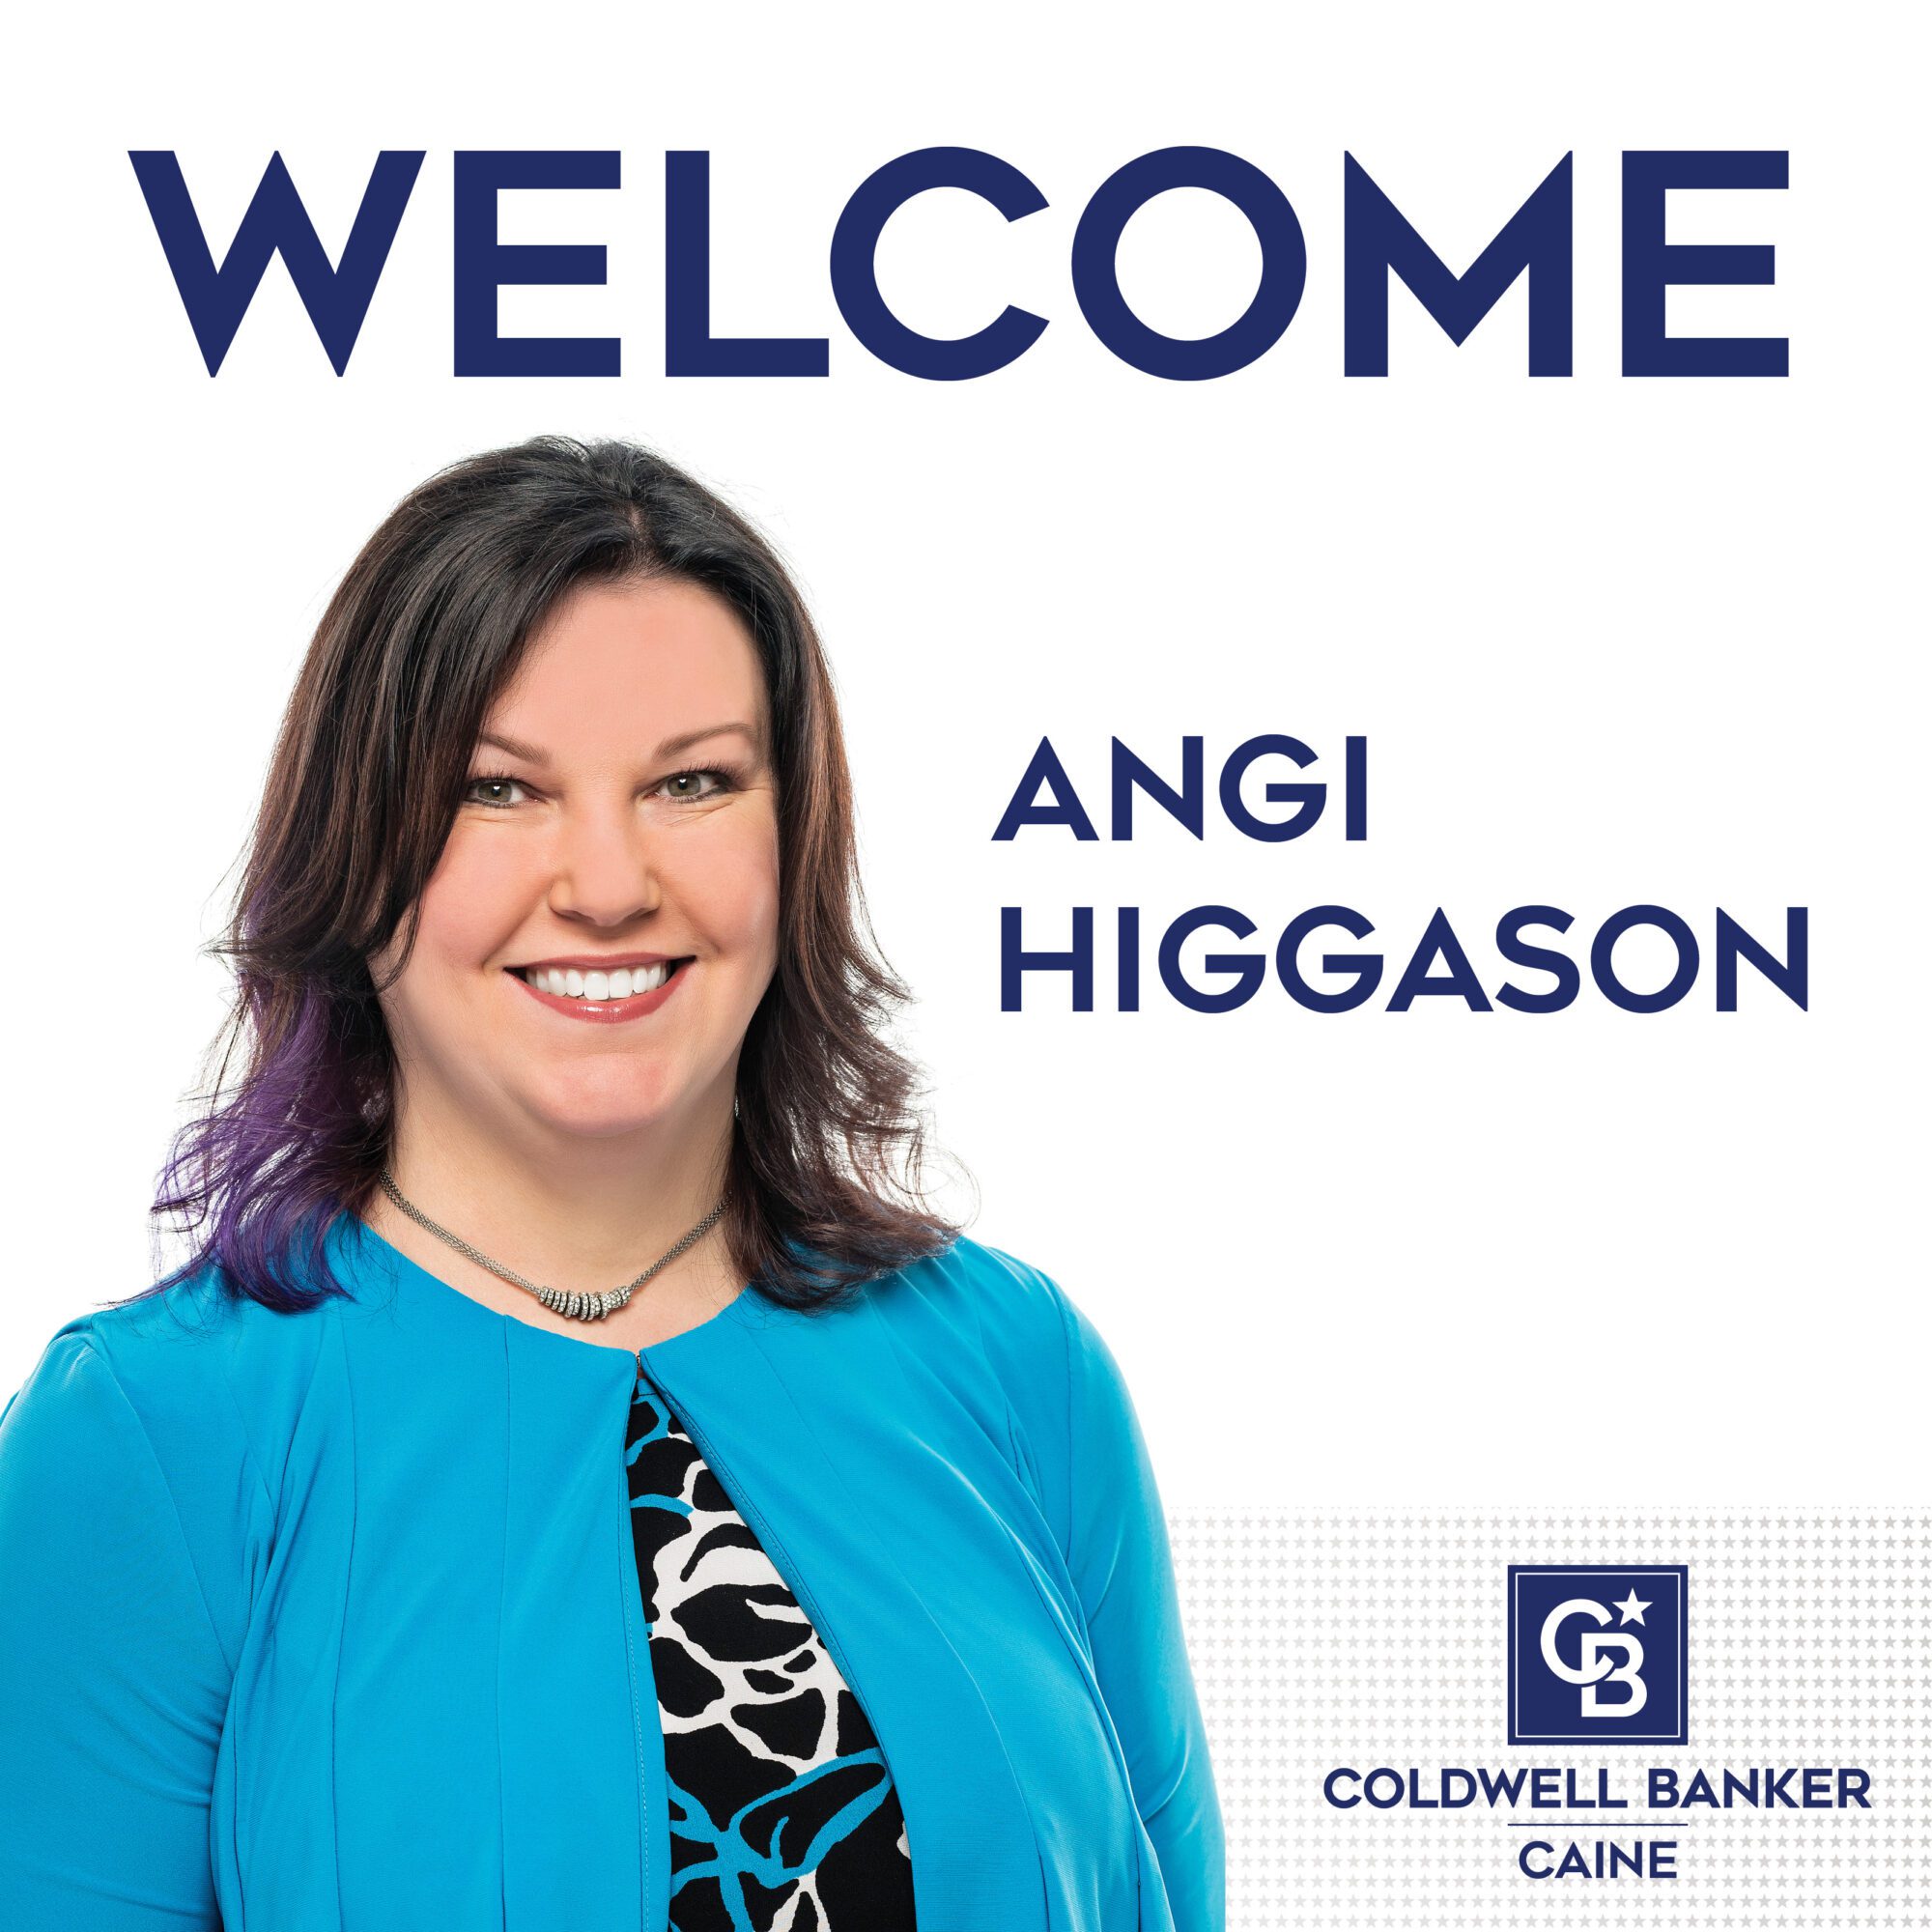 Angi Higgason Joins Coldwell Banker Caine in Spartanburg